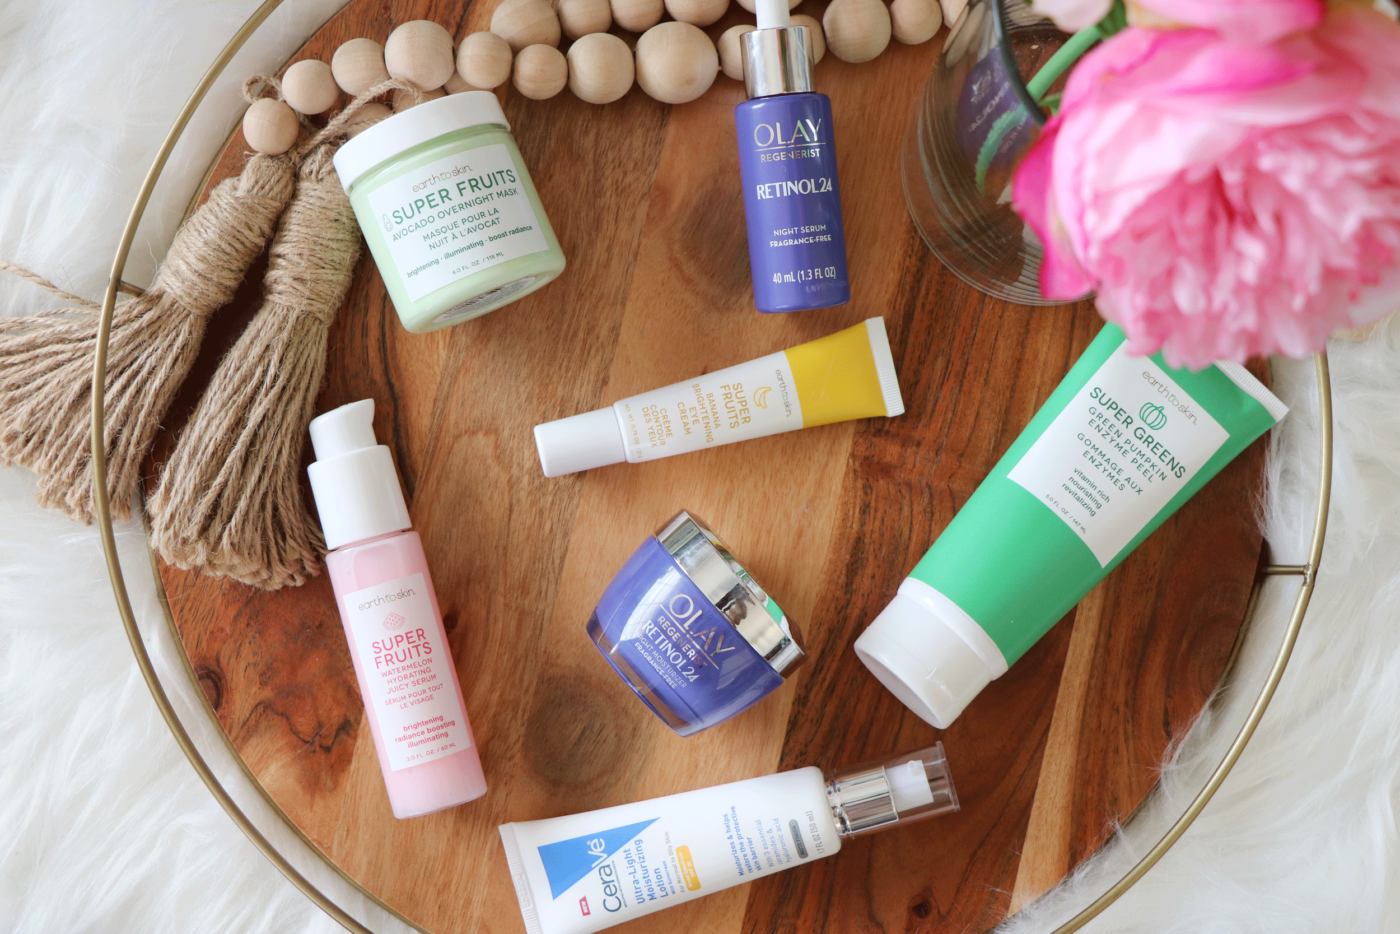 Looking for the perfect yet affordable Anti-Aging Skincare Routine? Skincare blogger Makeup Life and Love is sharing her top affordable finds at Walmart for under $100 here!